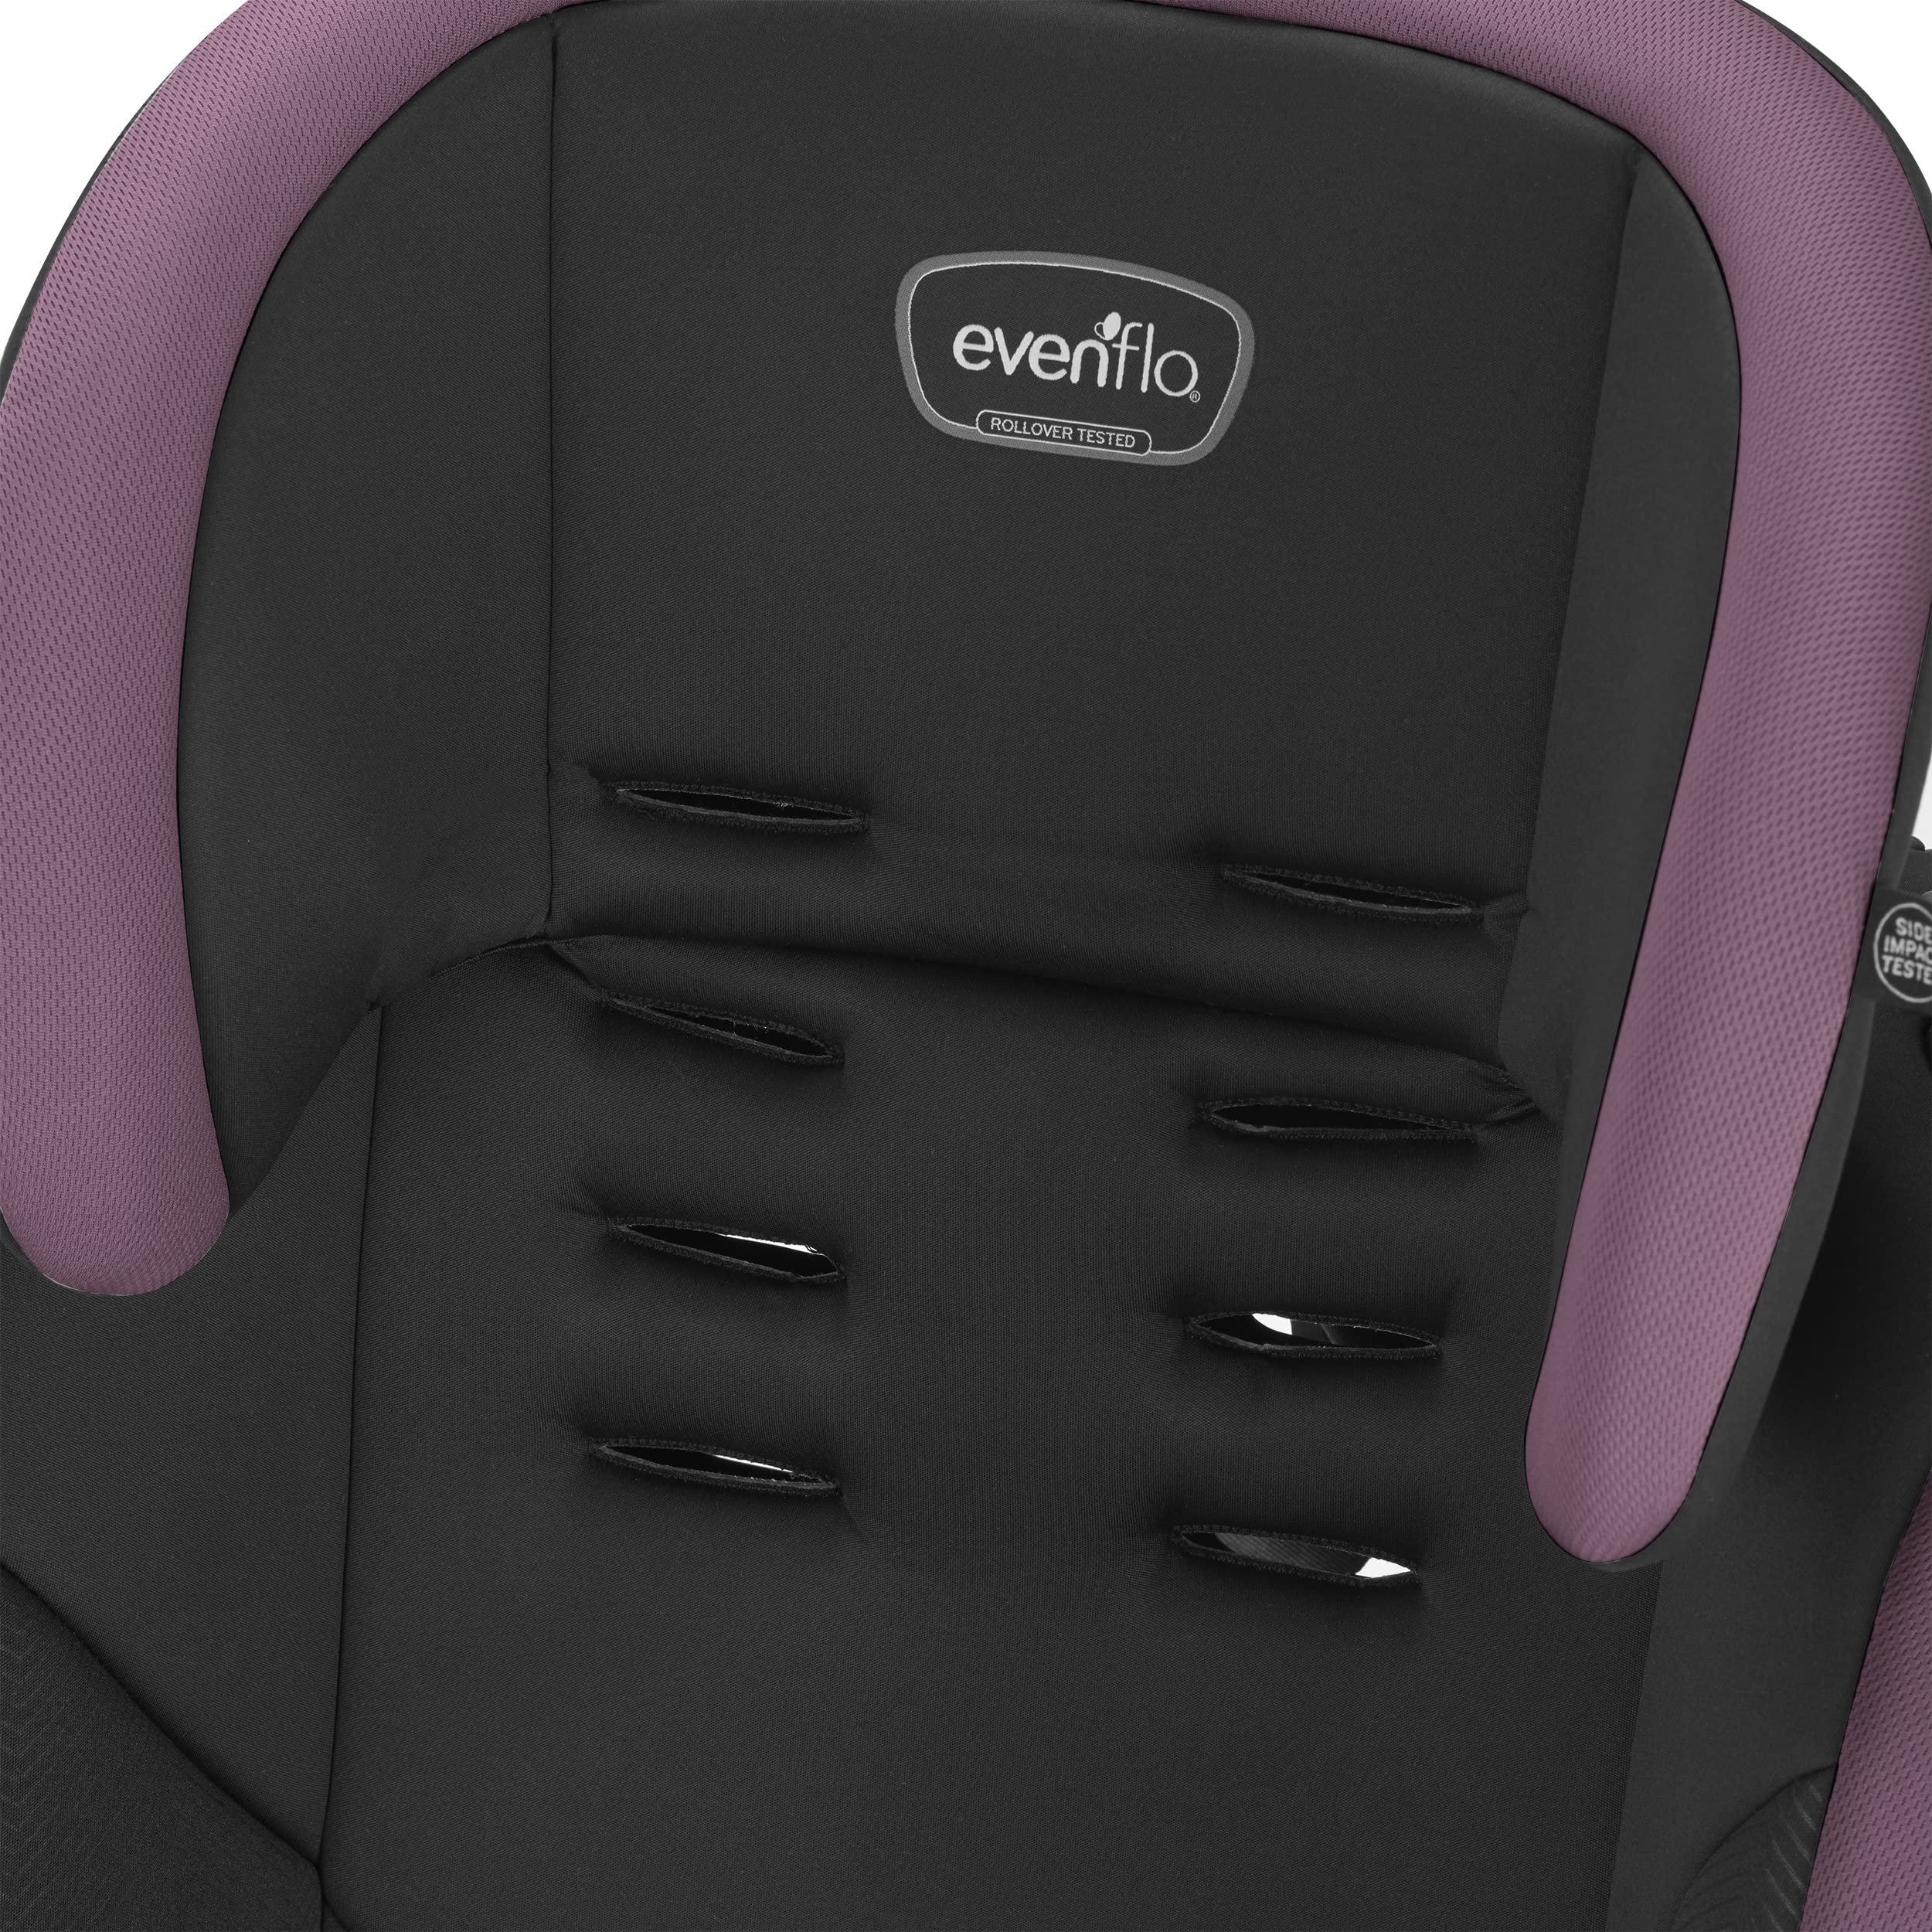 Evenflo Maestro Sport Convertible Booster Car Seat, Forward Facing, High Back, 5-Point Harness, For Kids 2 to 8 Years Old, Whitney Pink